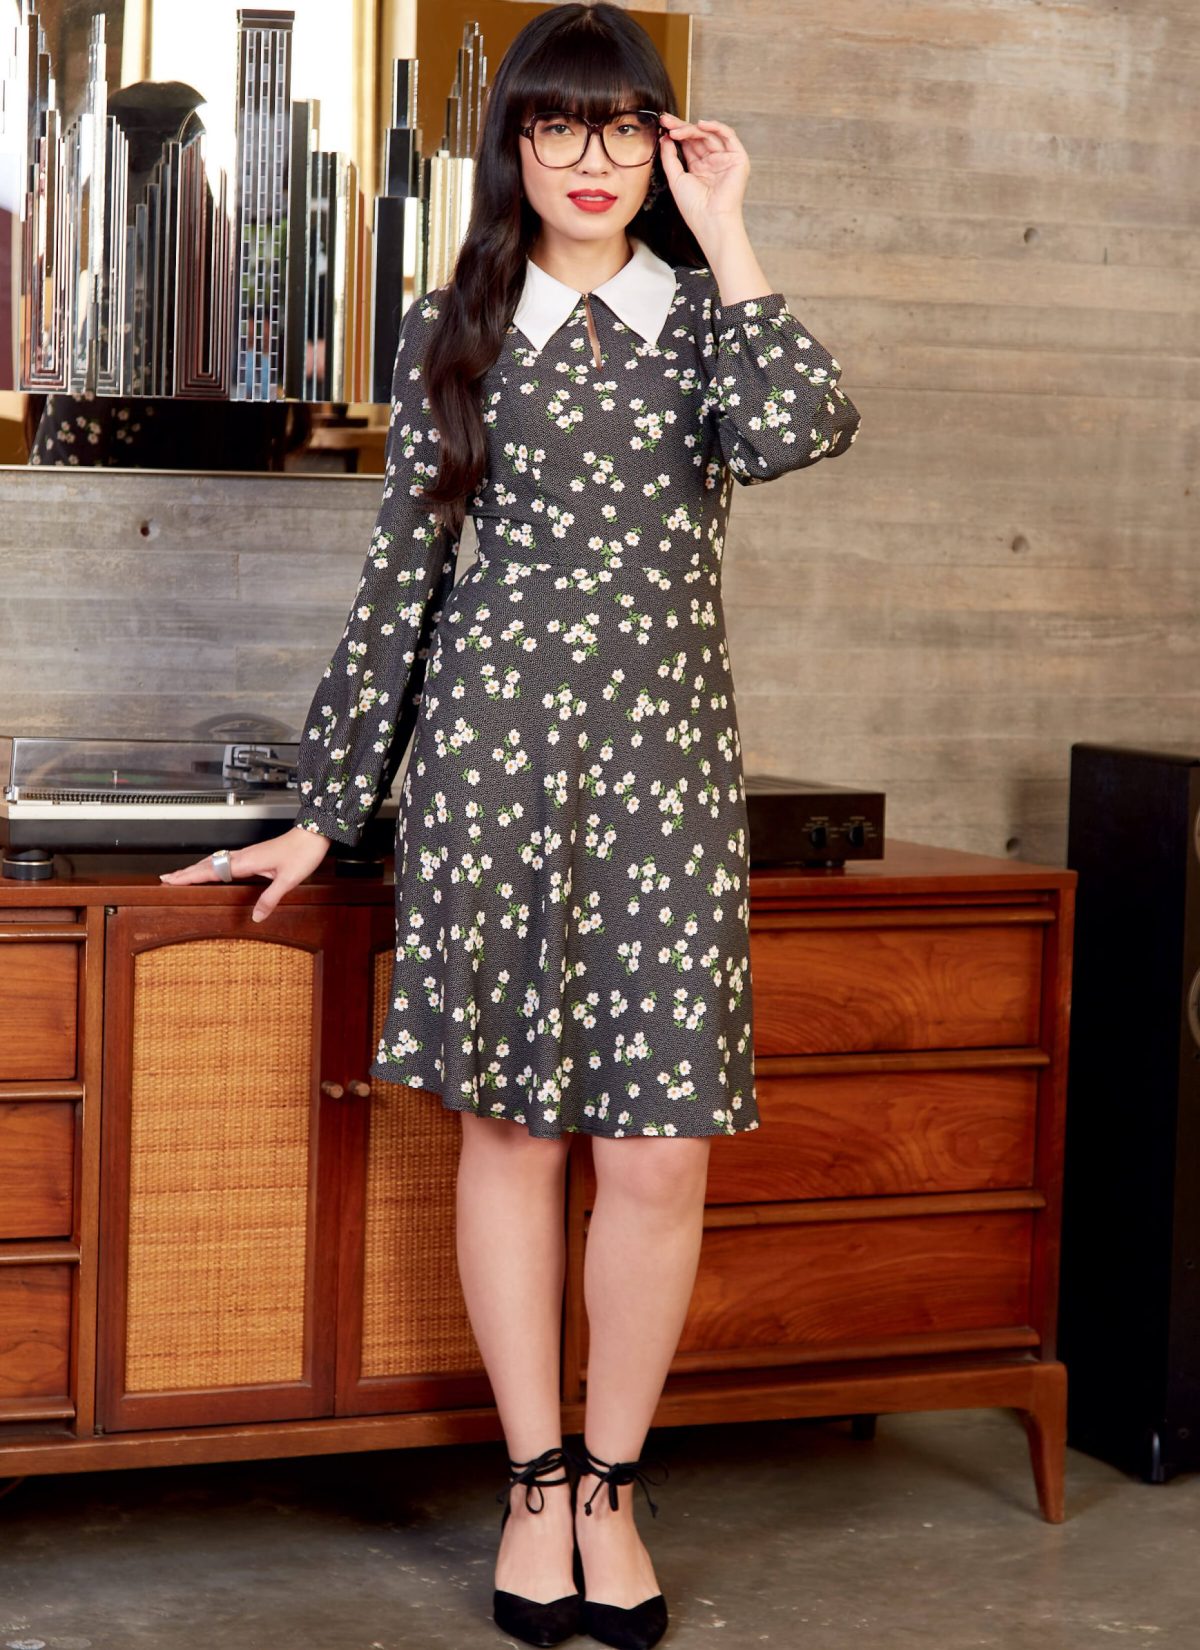 McCall's Sewing Pattern M8239 Misses' Dresses